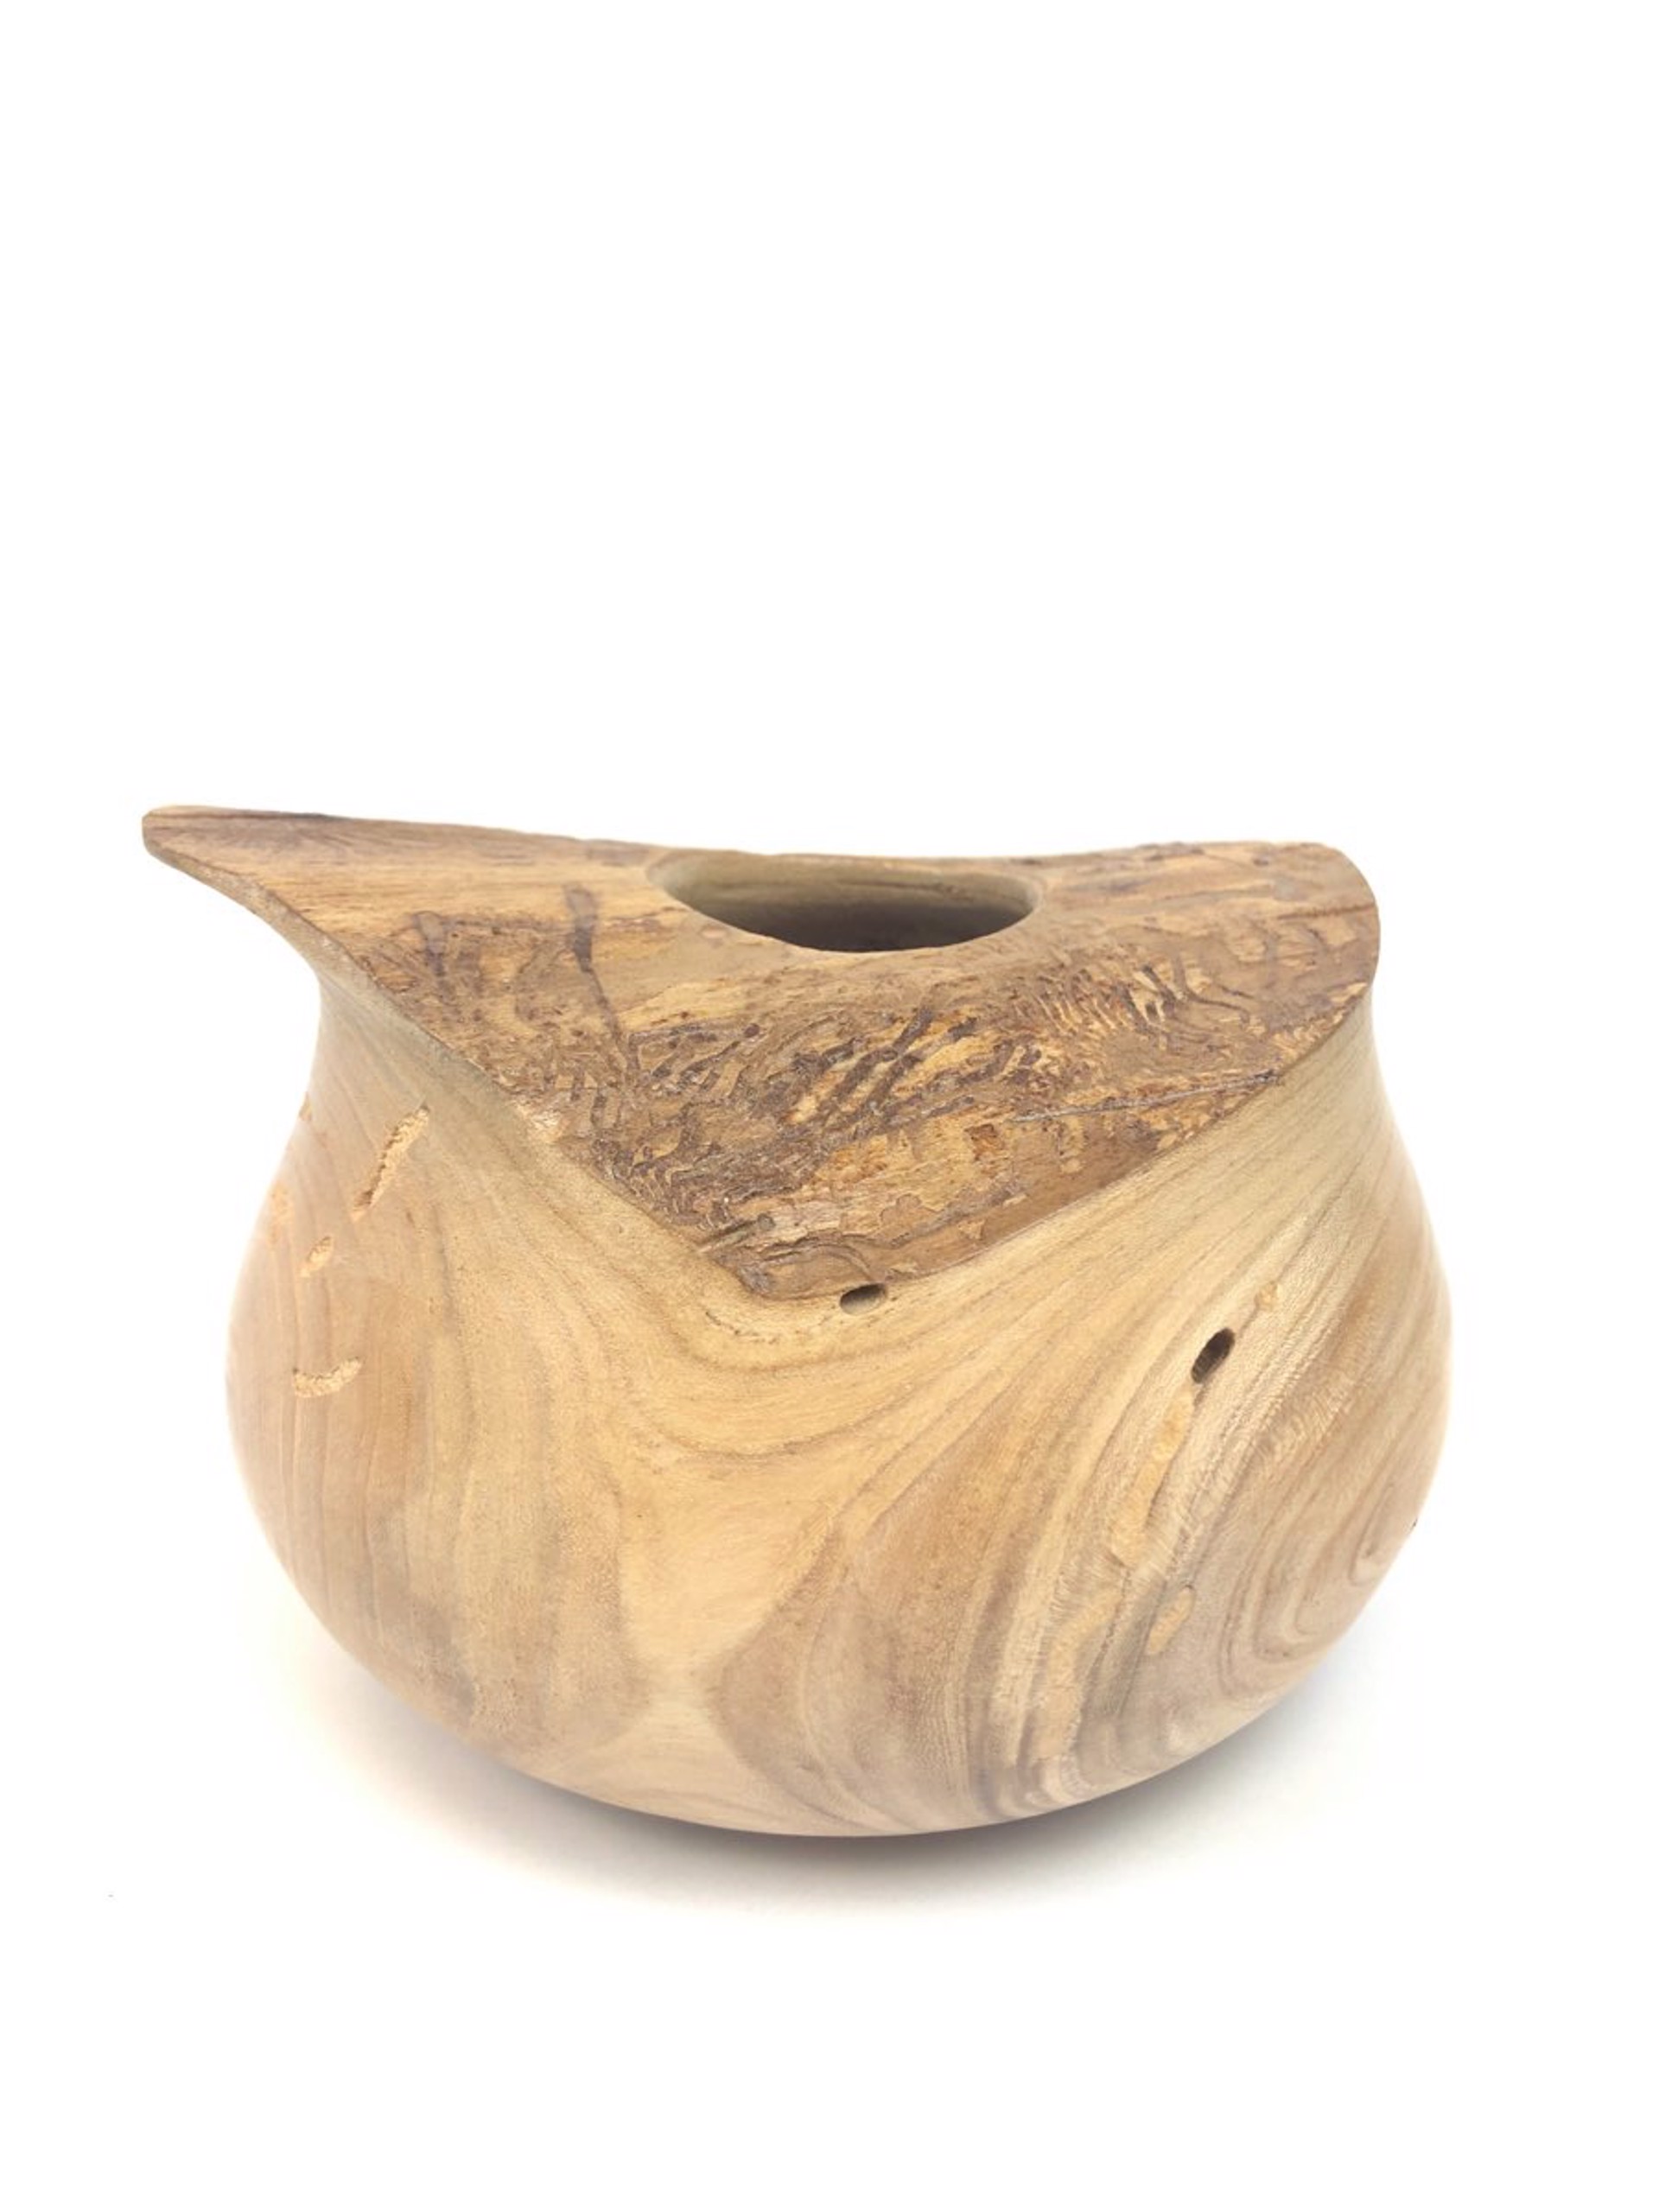 Vessel with Natural Edge by Don Moore